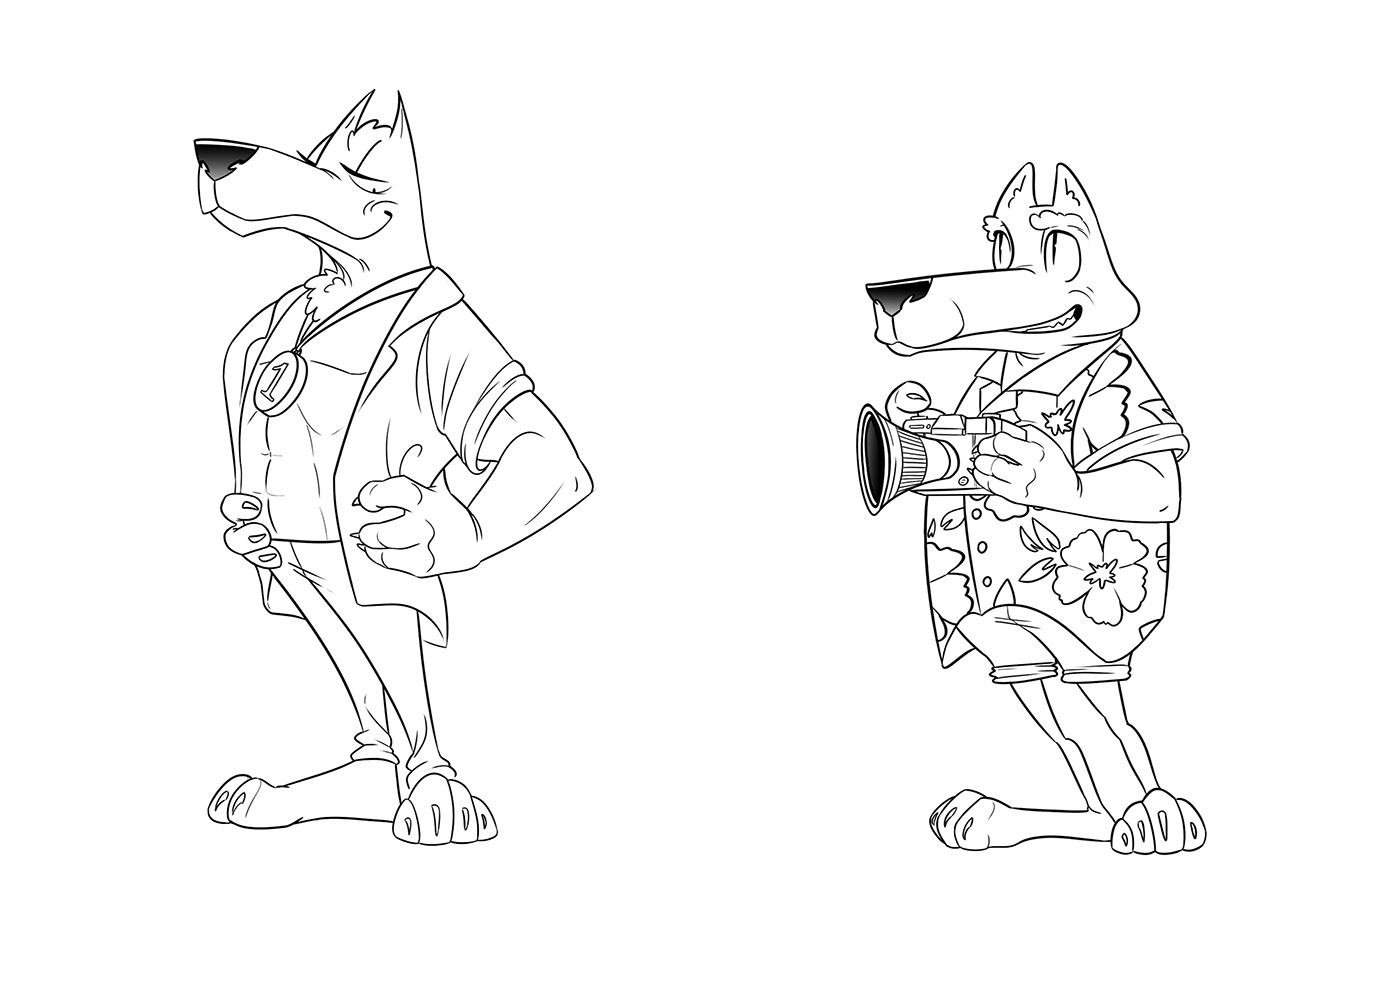 werewolves designes, the sporty and the tourist